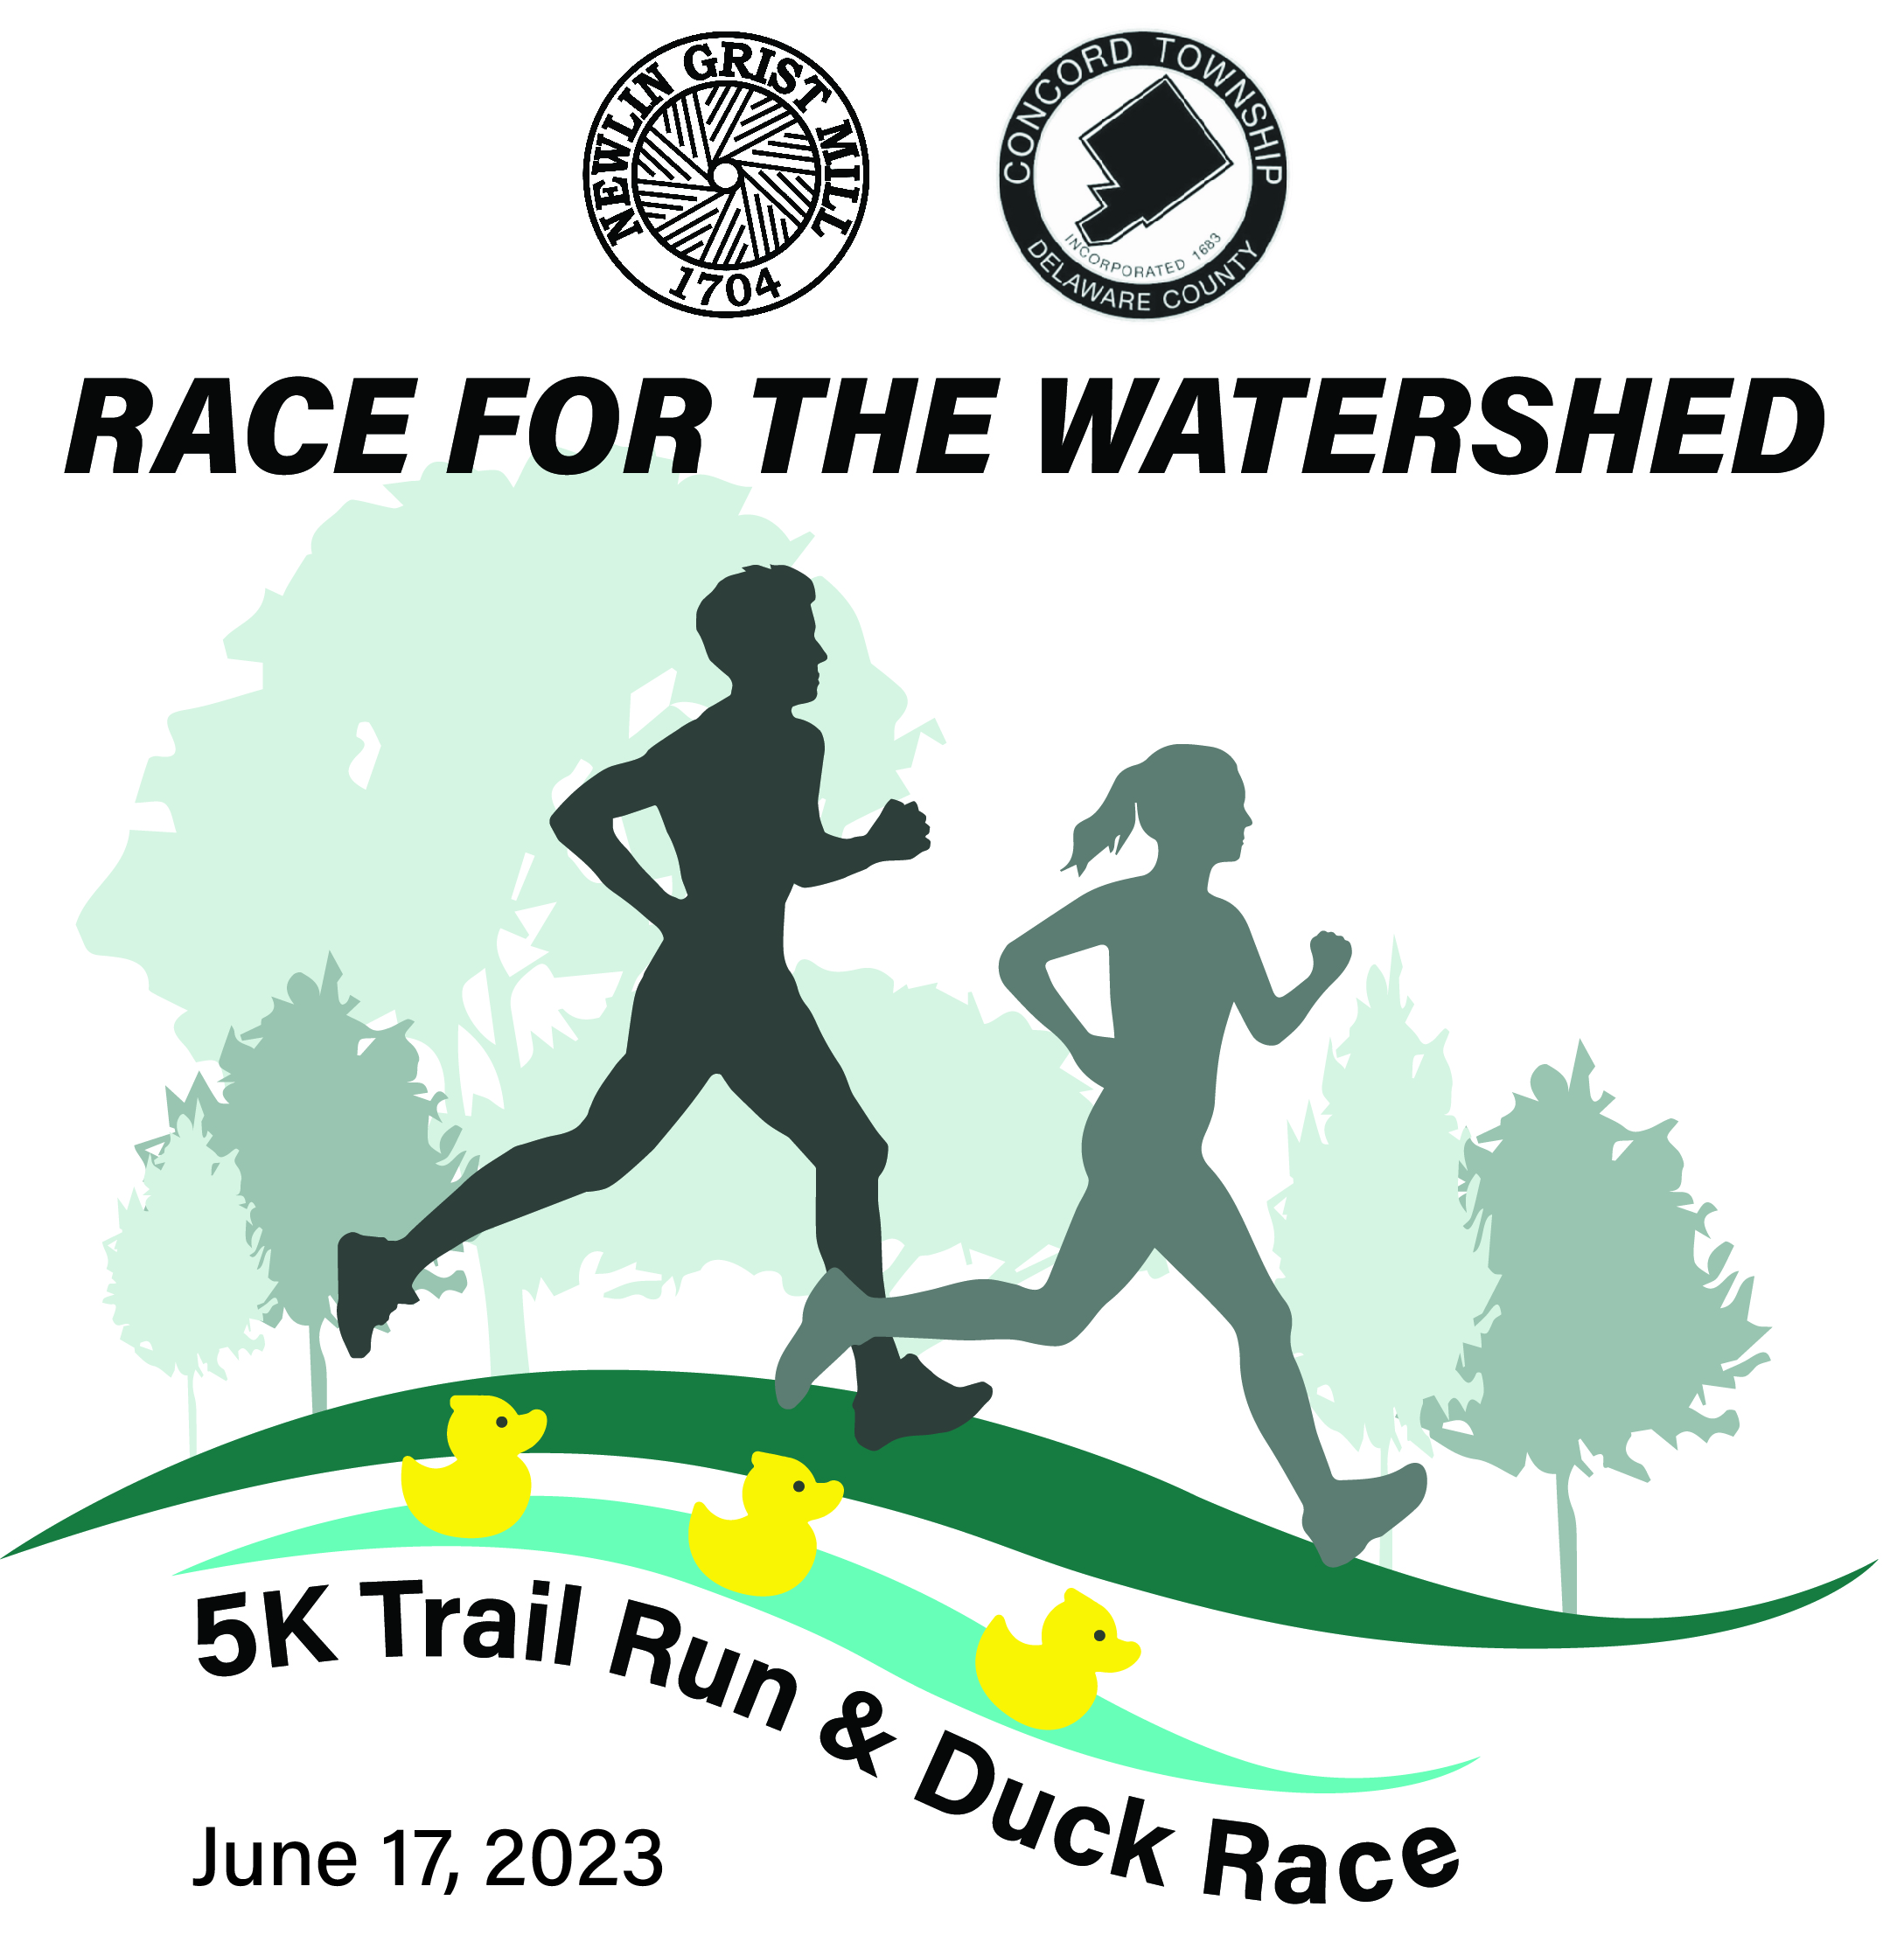 Race for the Watershed logo on RaceRaves